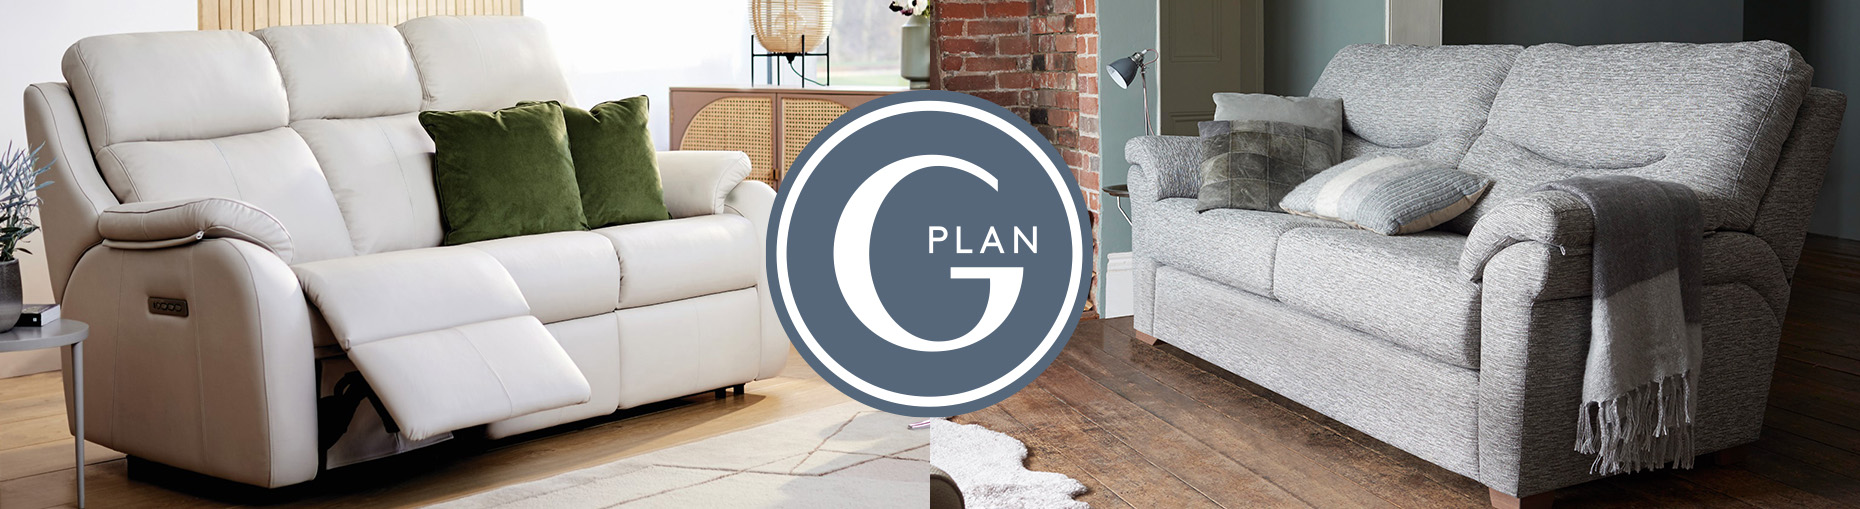 G Plan Upholstery at Forrest Furnishing